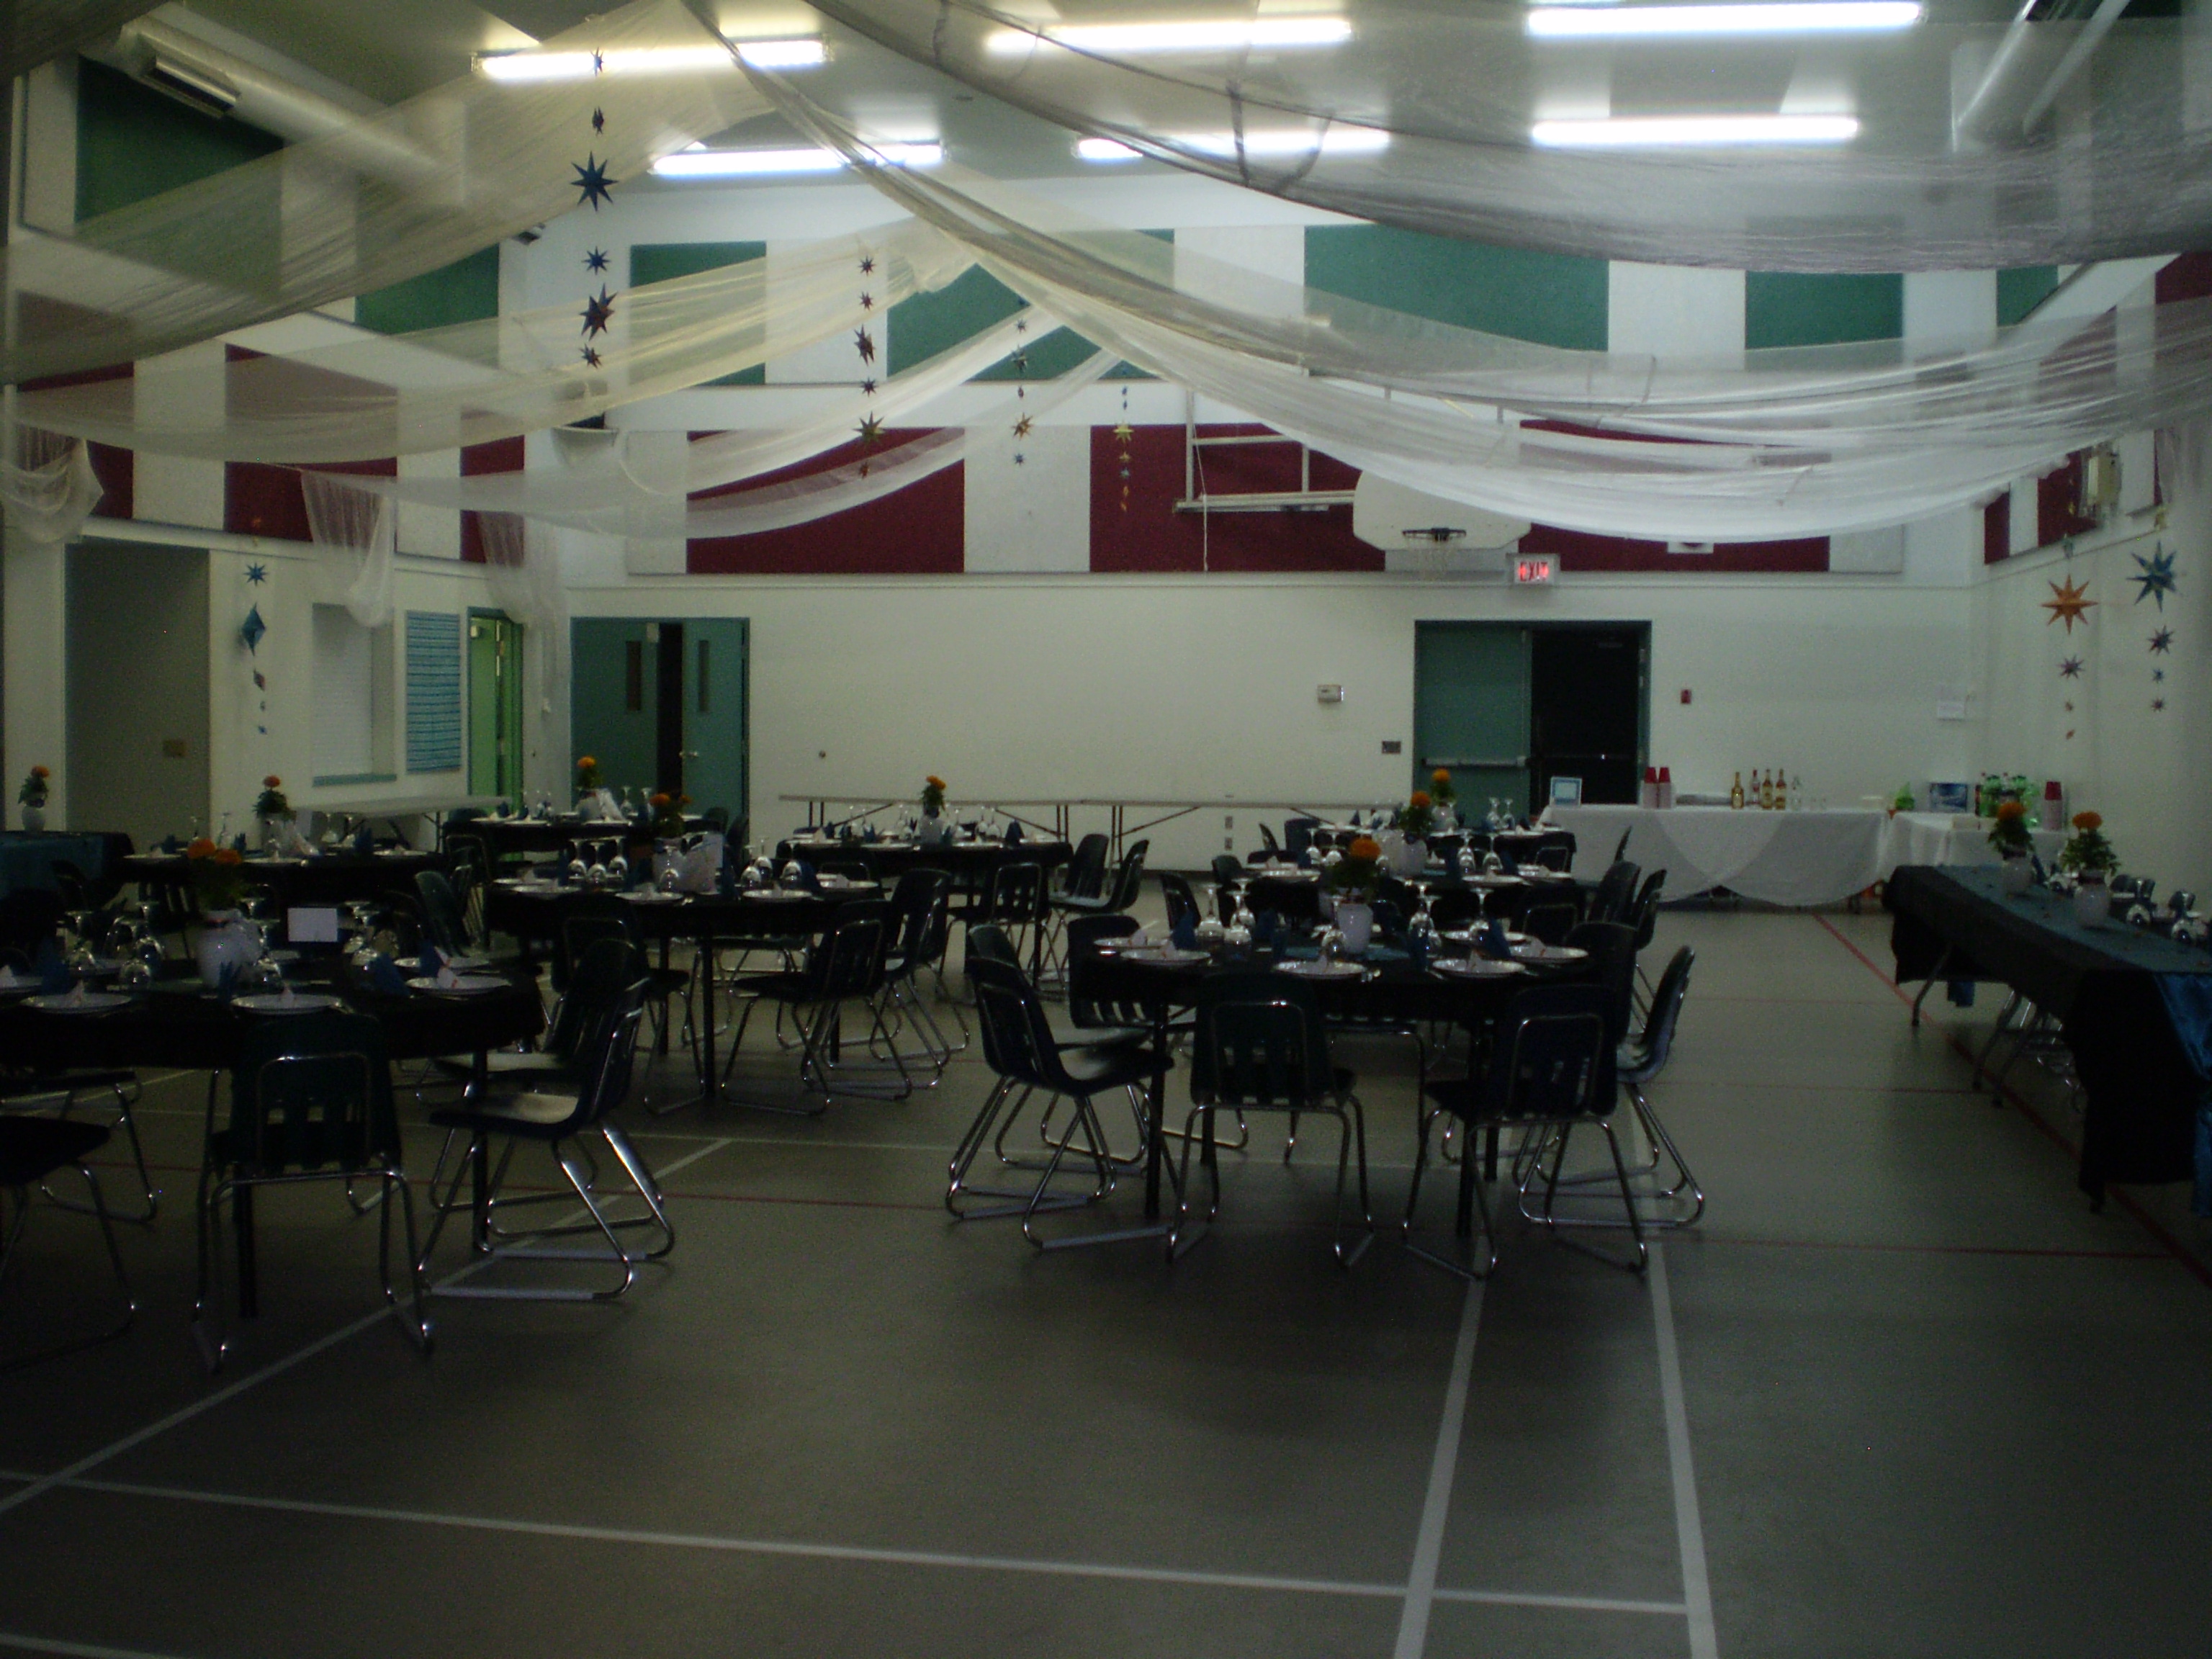 Gym Decorated for an event